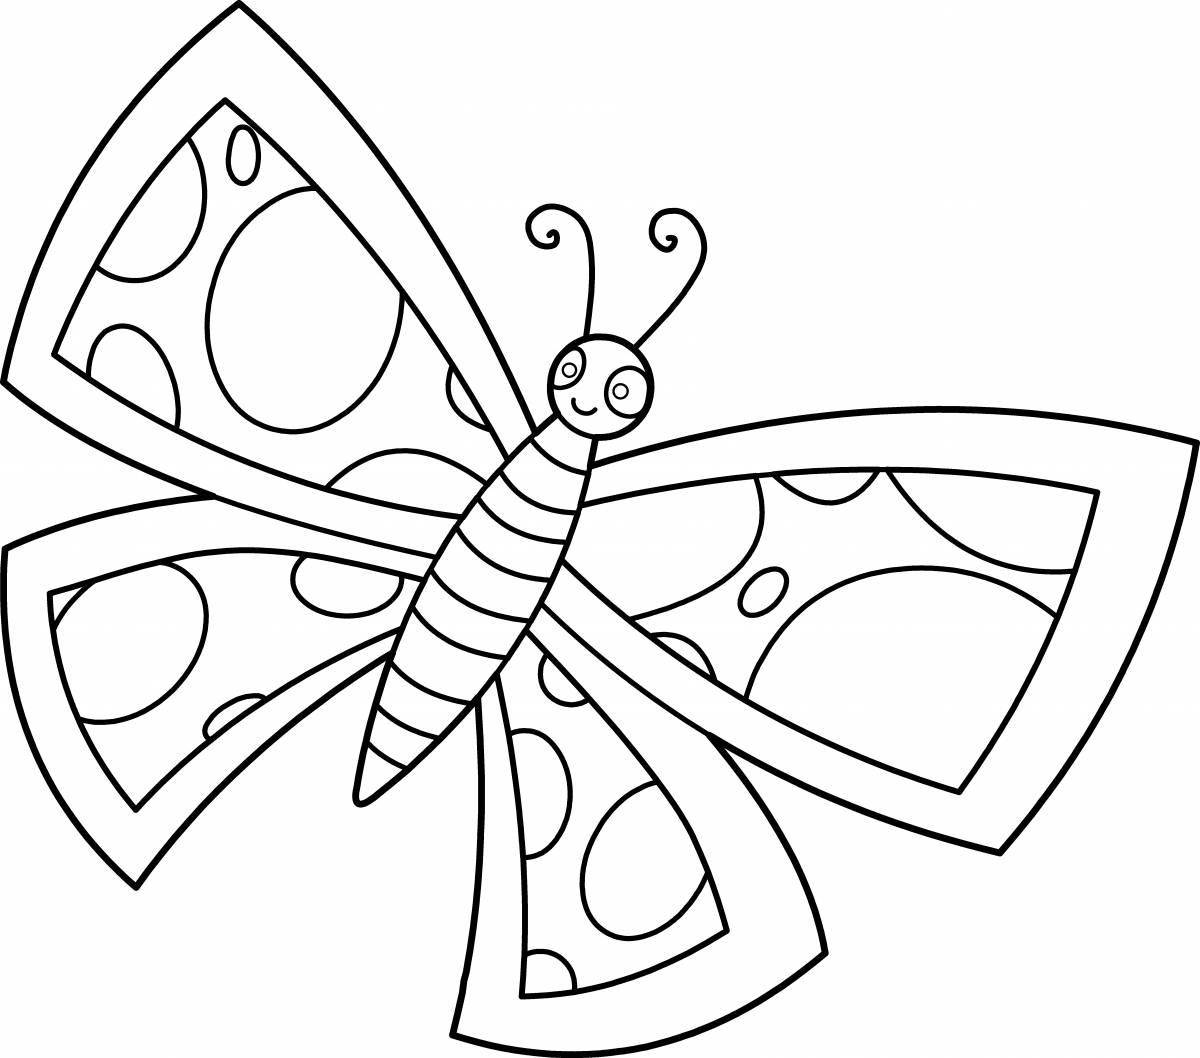 Adorable Butterfly Coloring Page